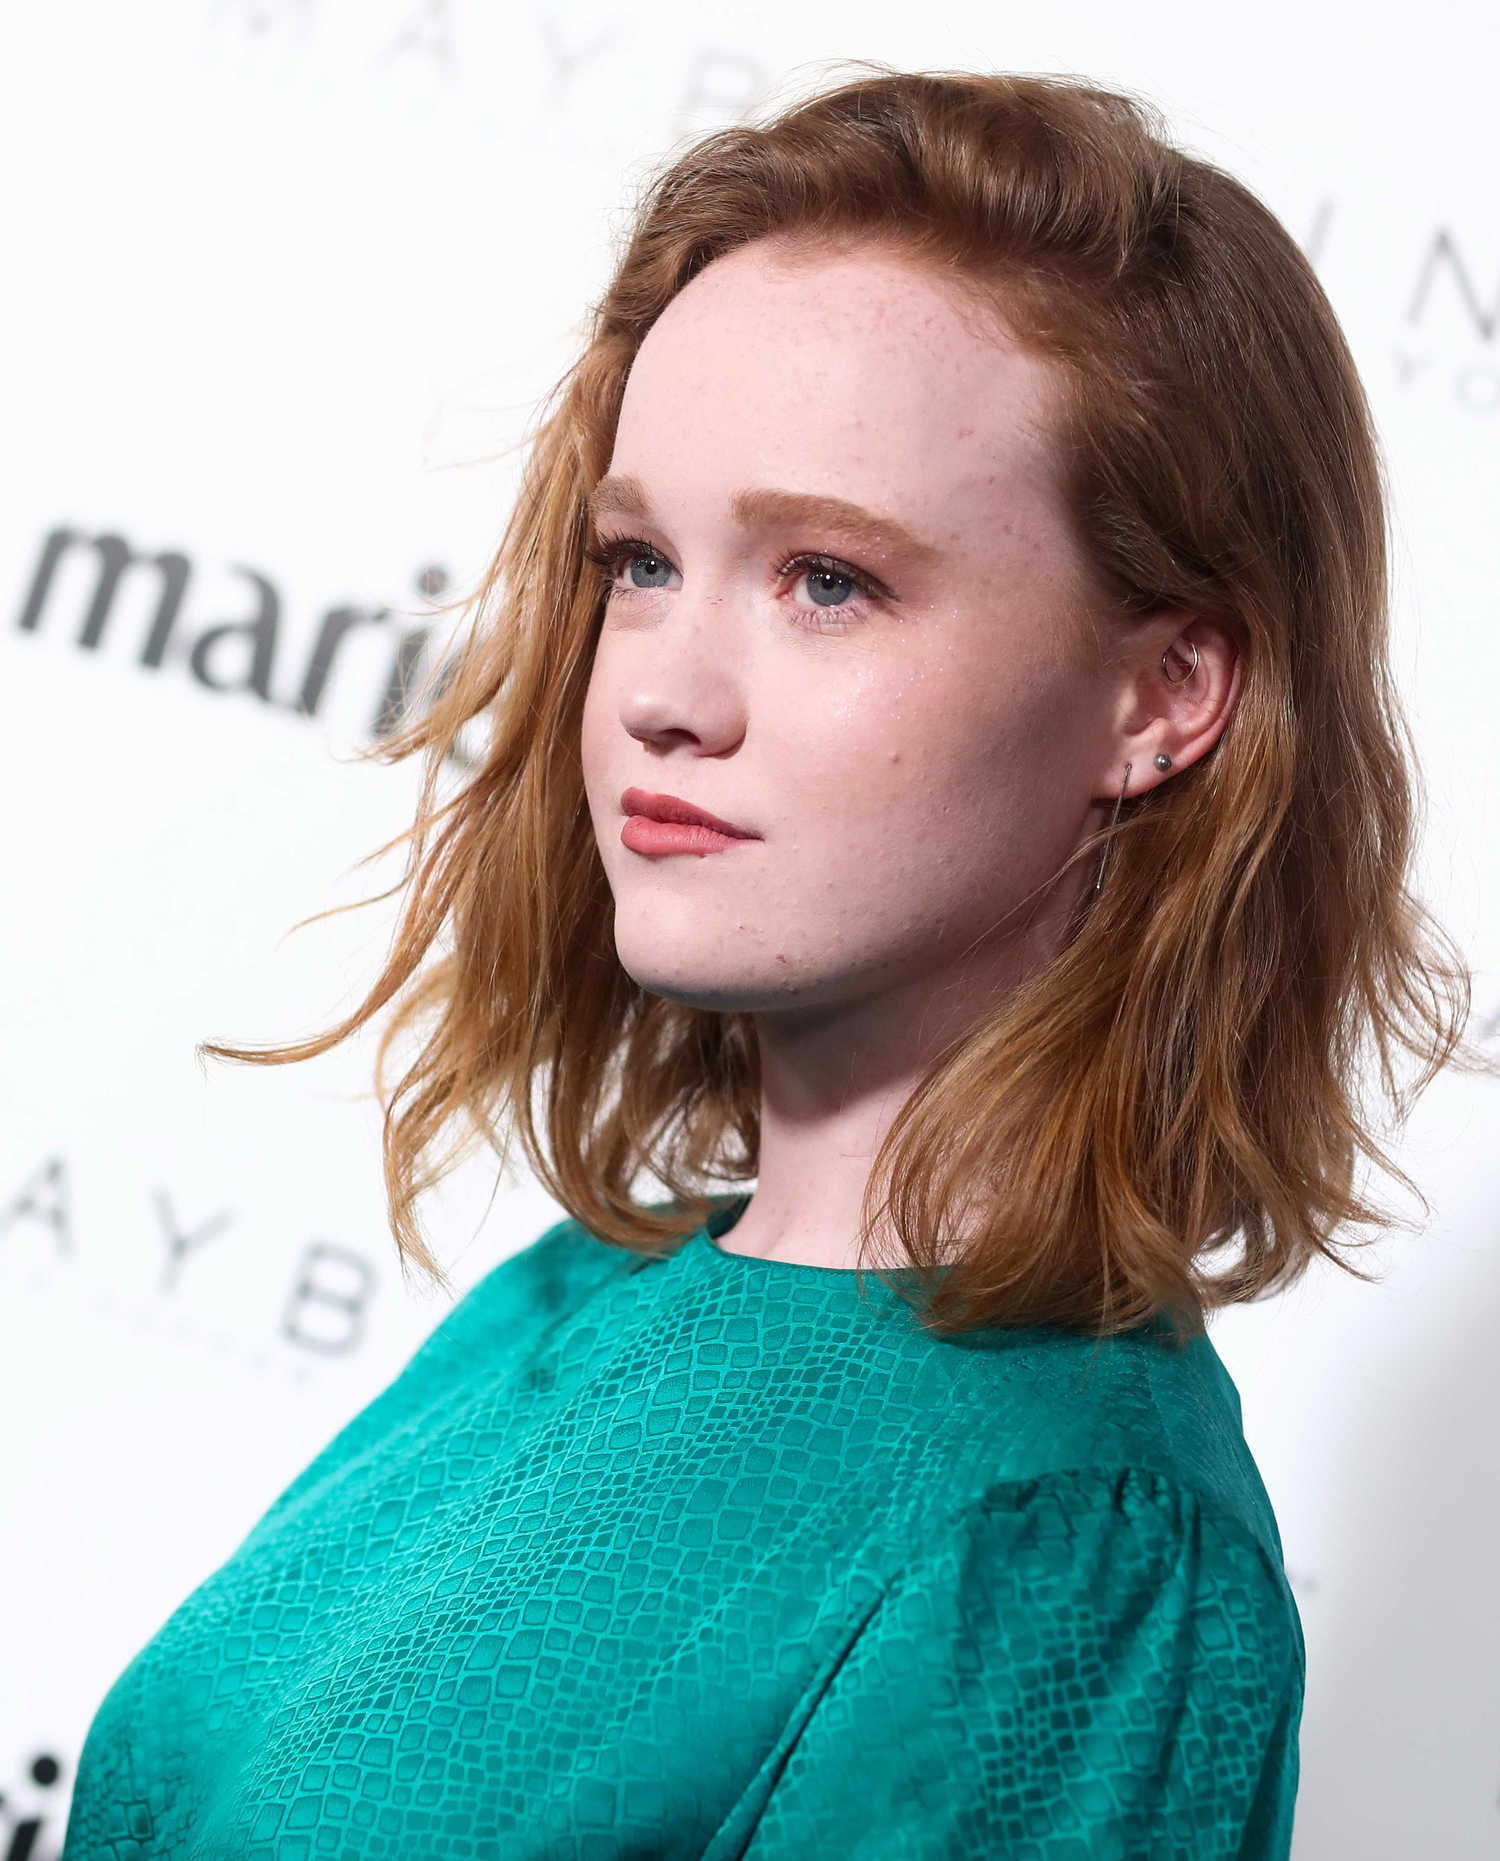 Liv hewson is a 24 year old australian actress. 